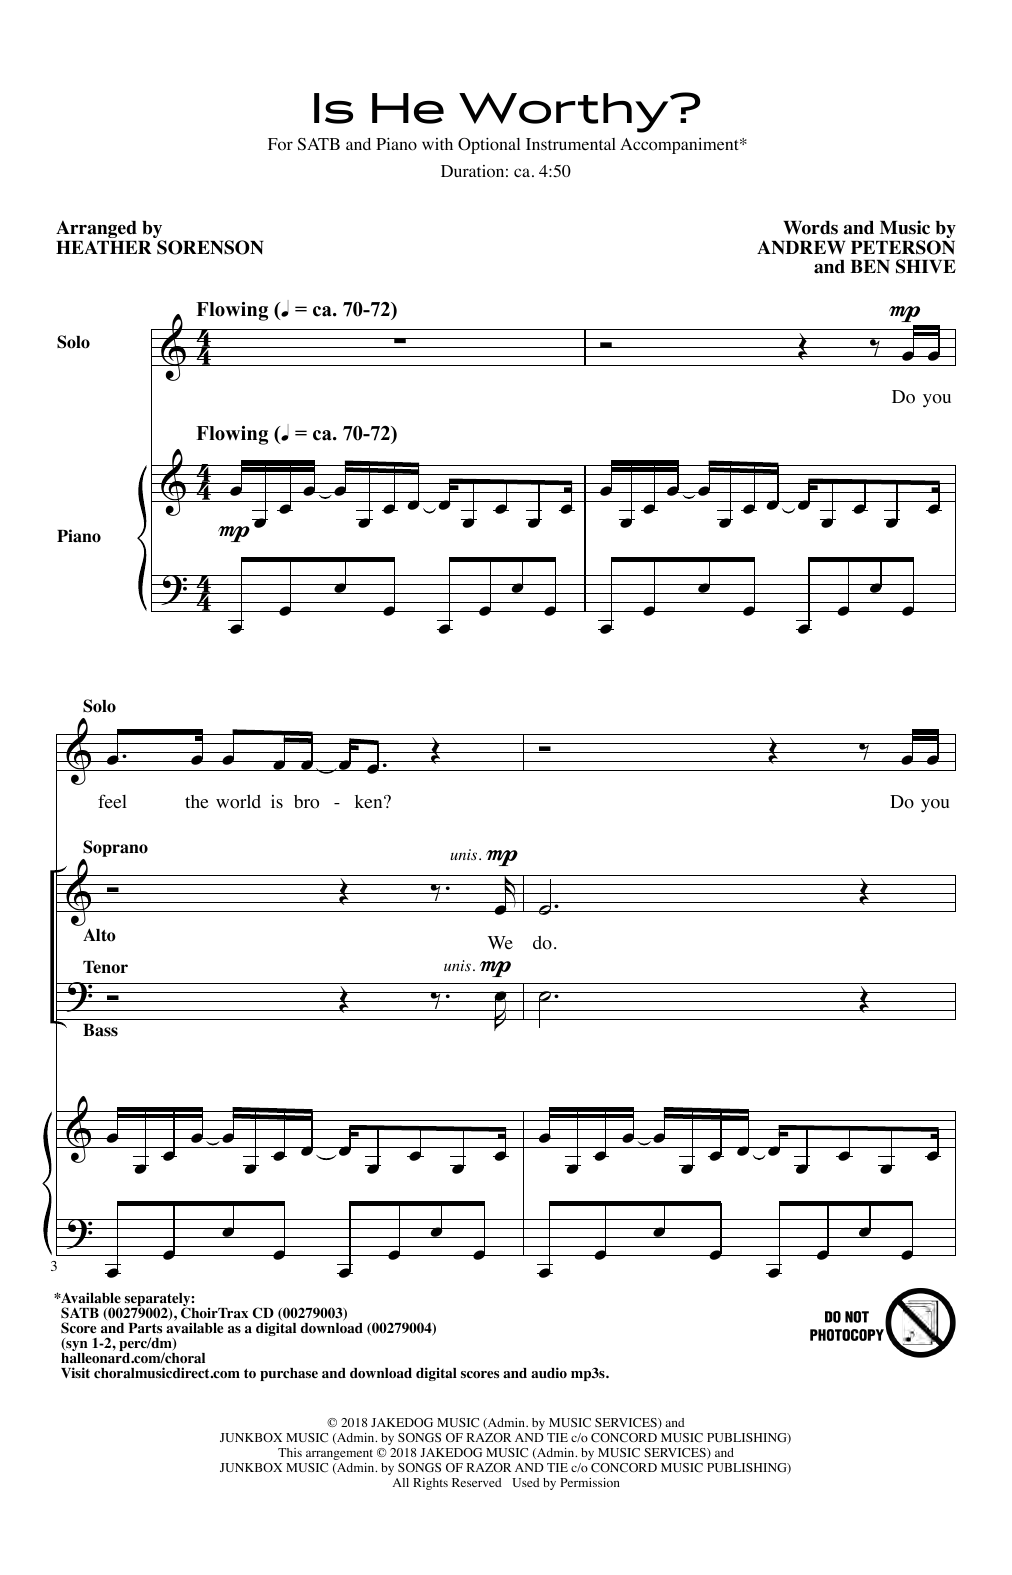 Download Andrew Peterson Is He Worthy? (arr. Heather Sorenson) Sheet Music